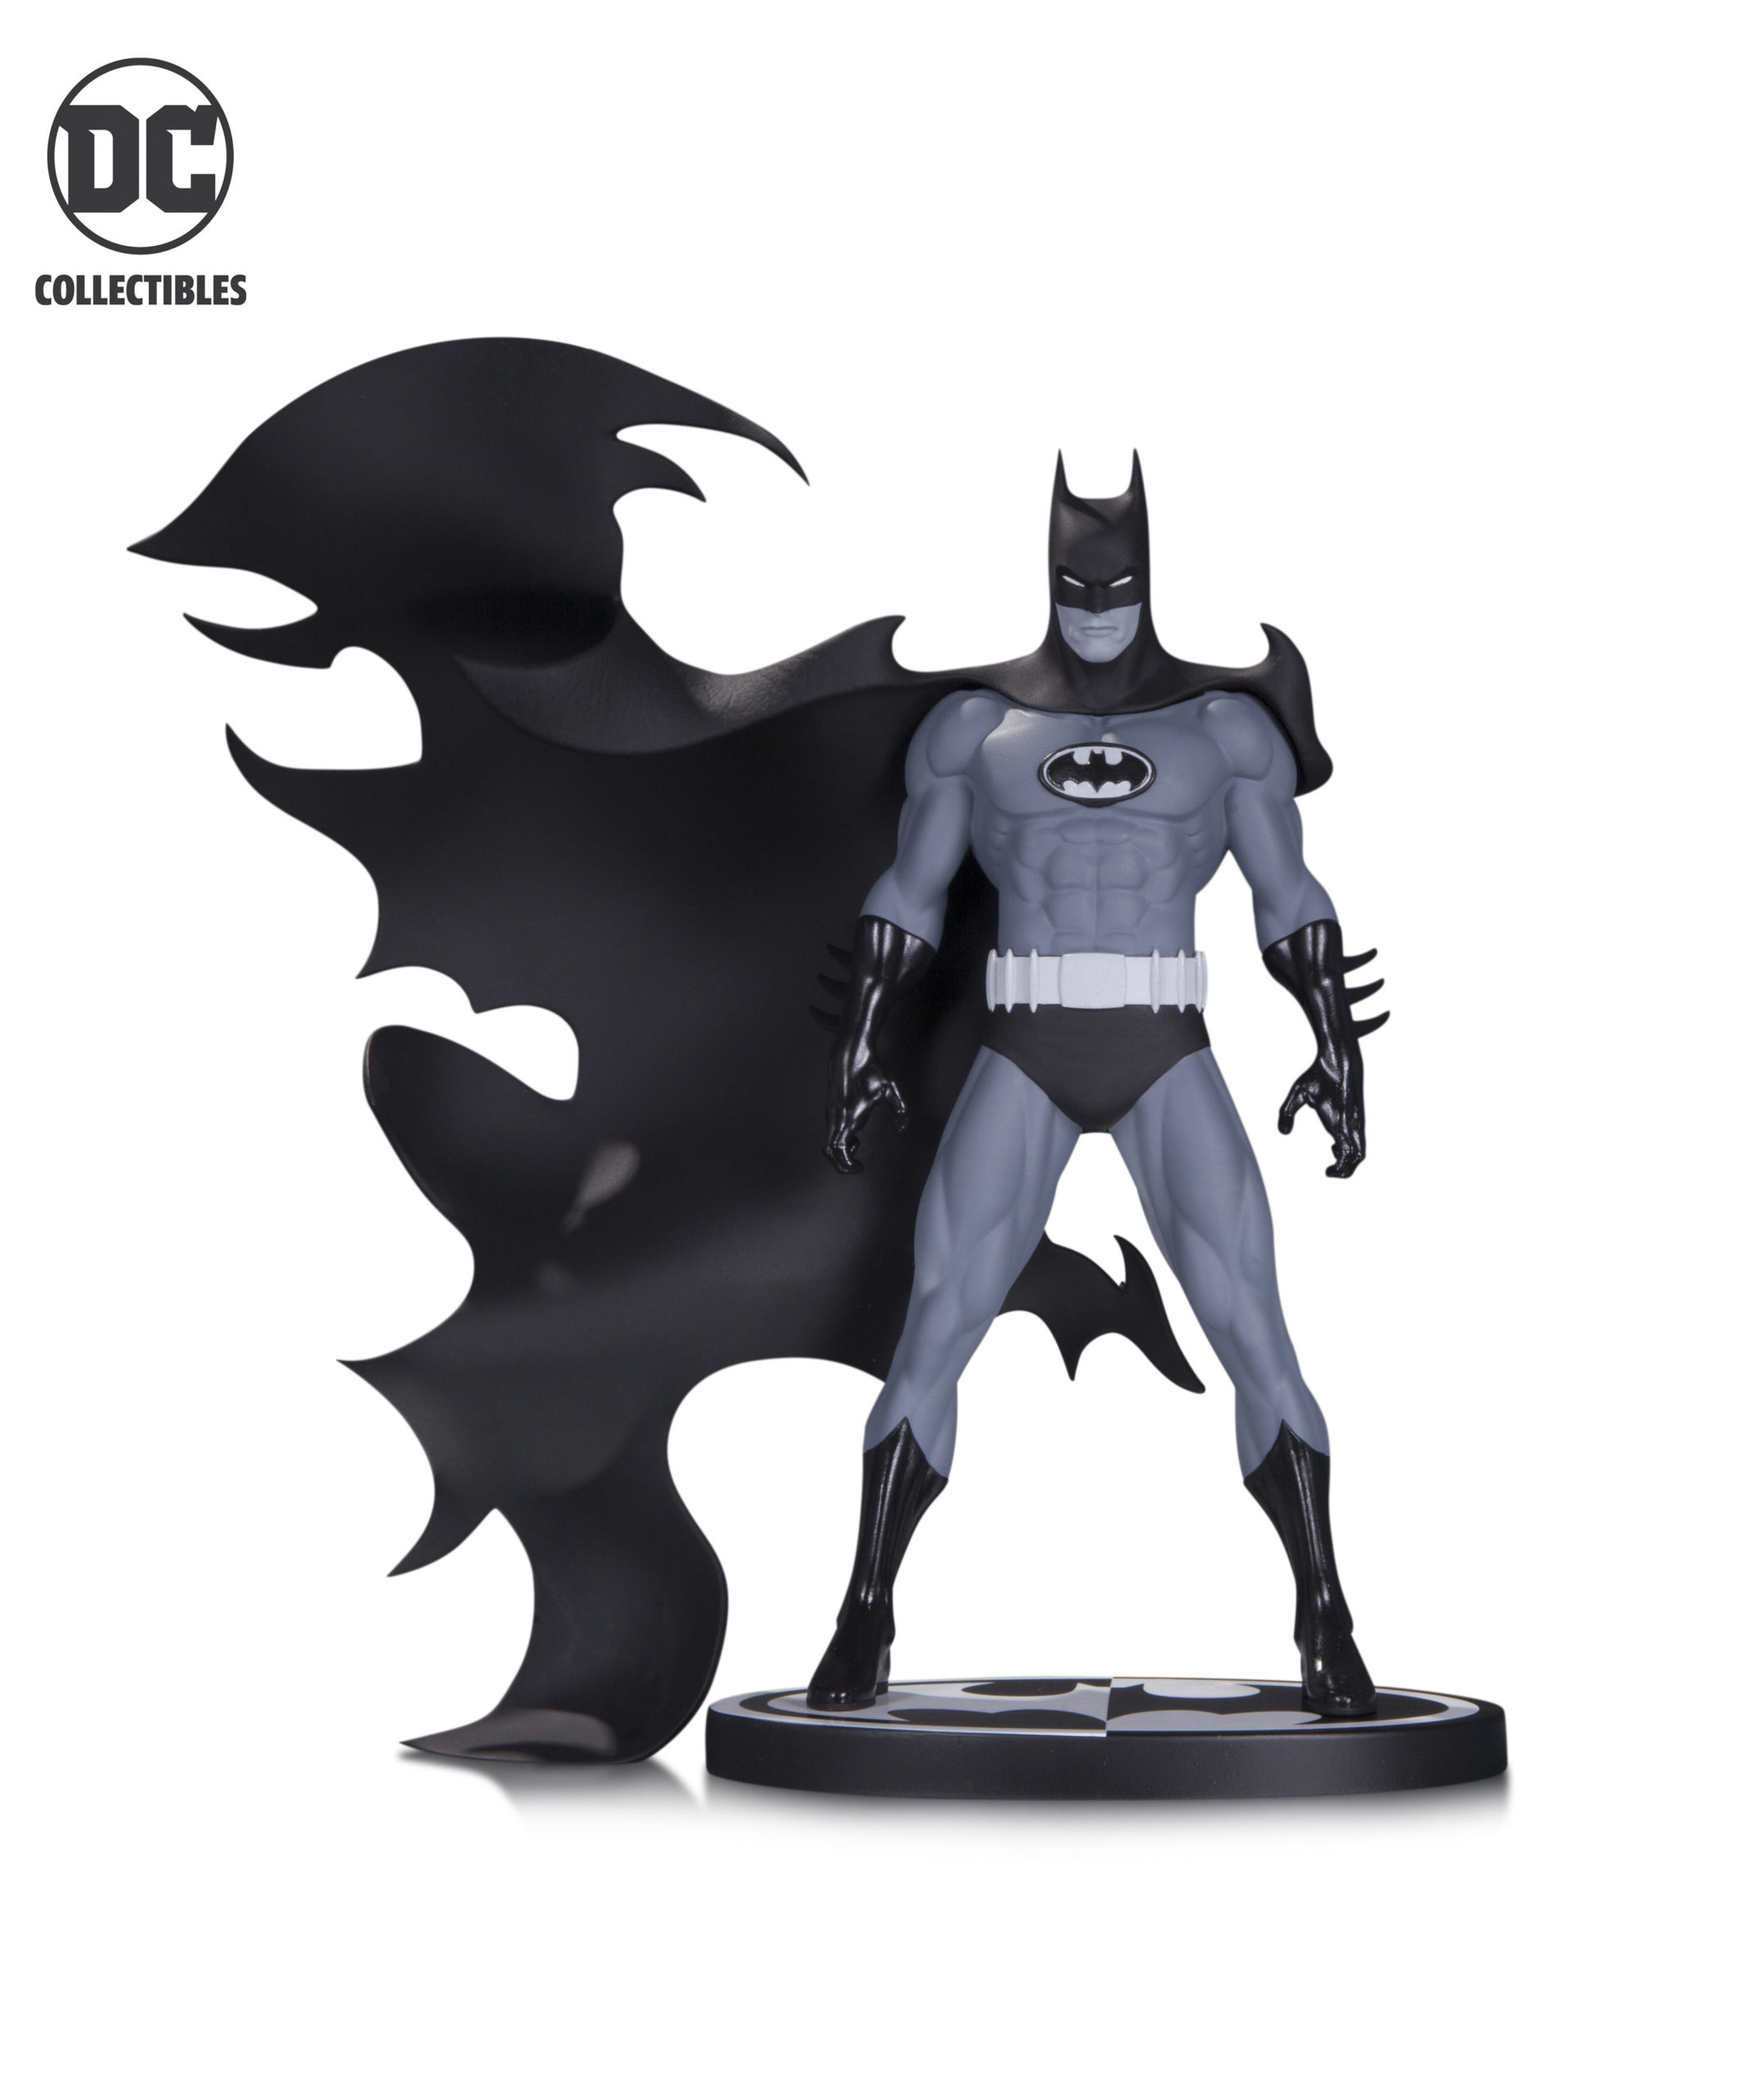 DC Collectibles’ Latest Puts Gotham City PD’s Plight In Perspective